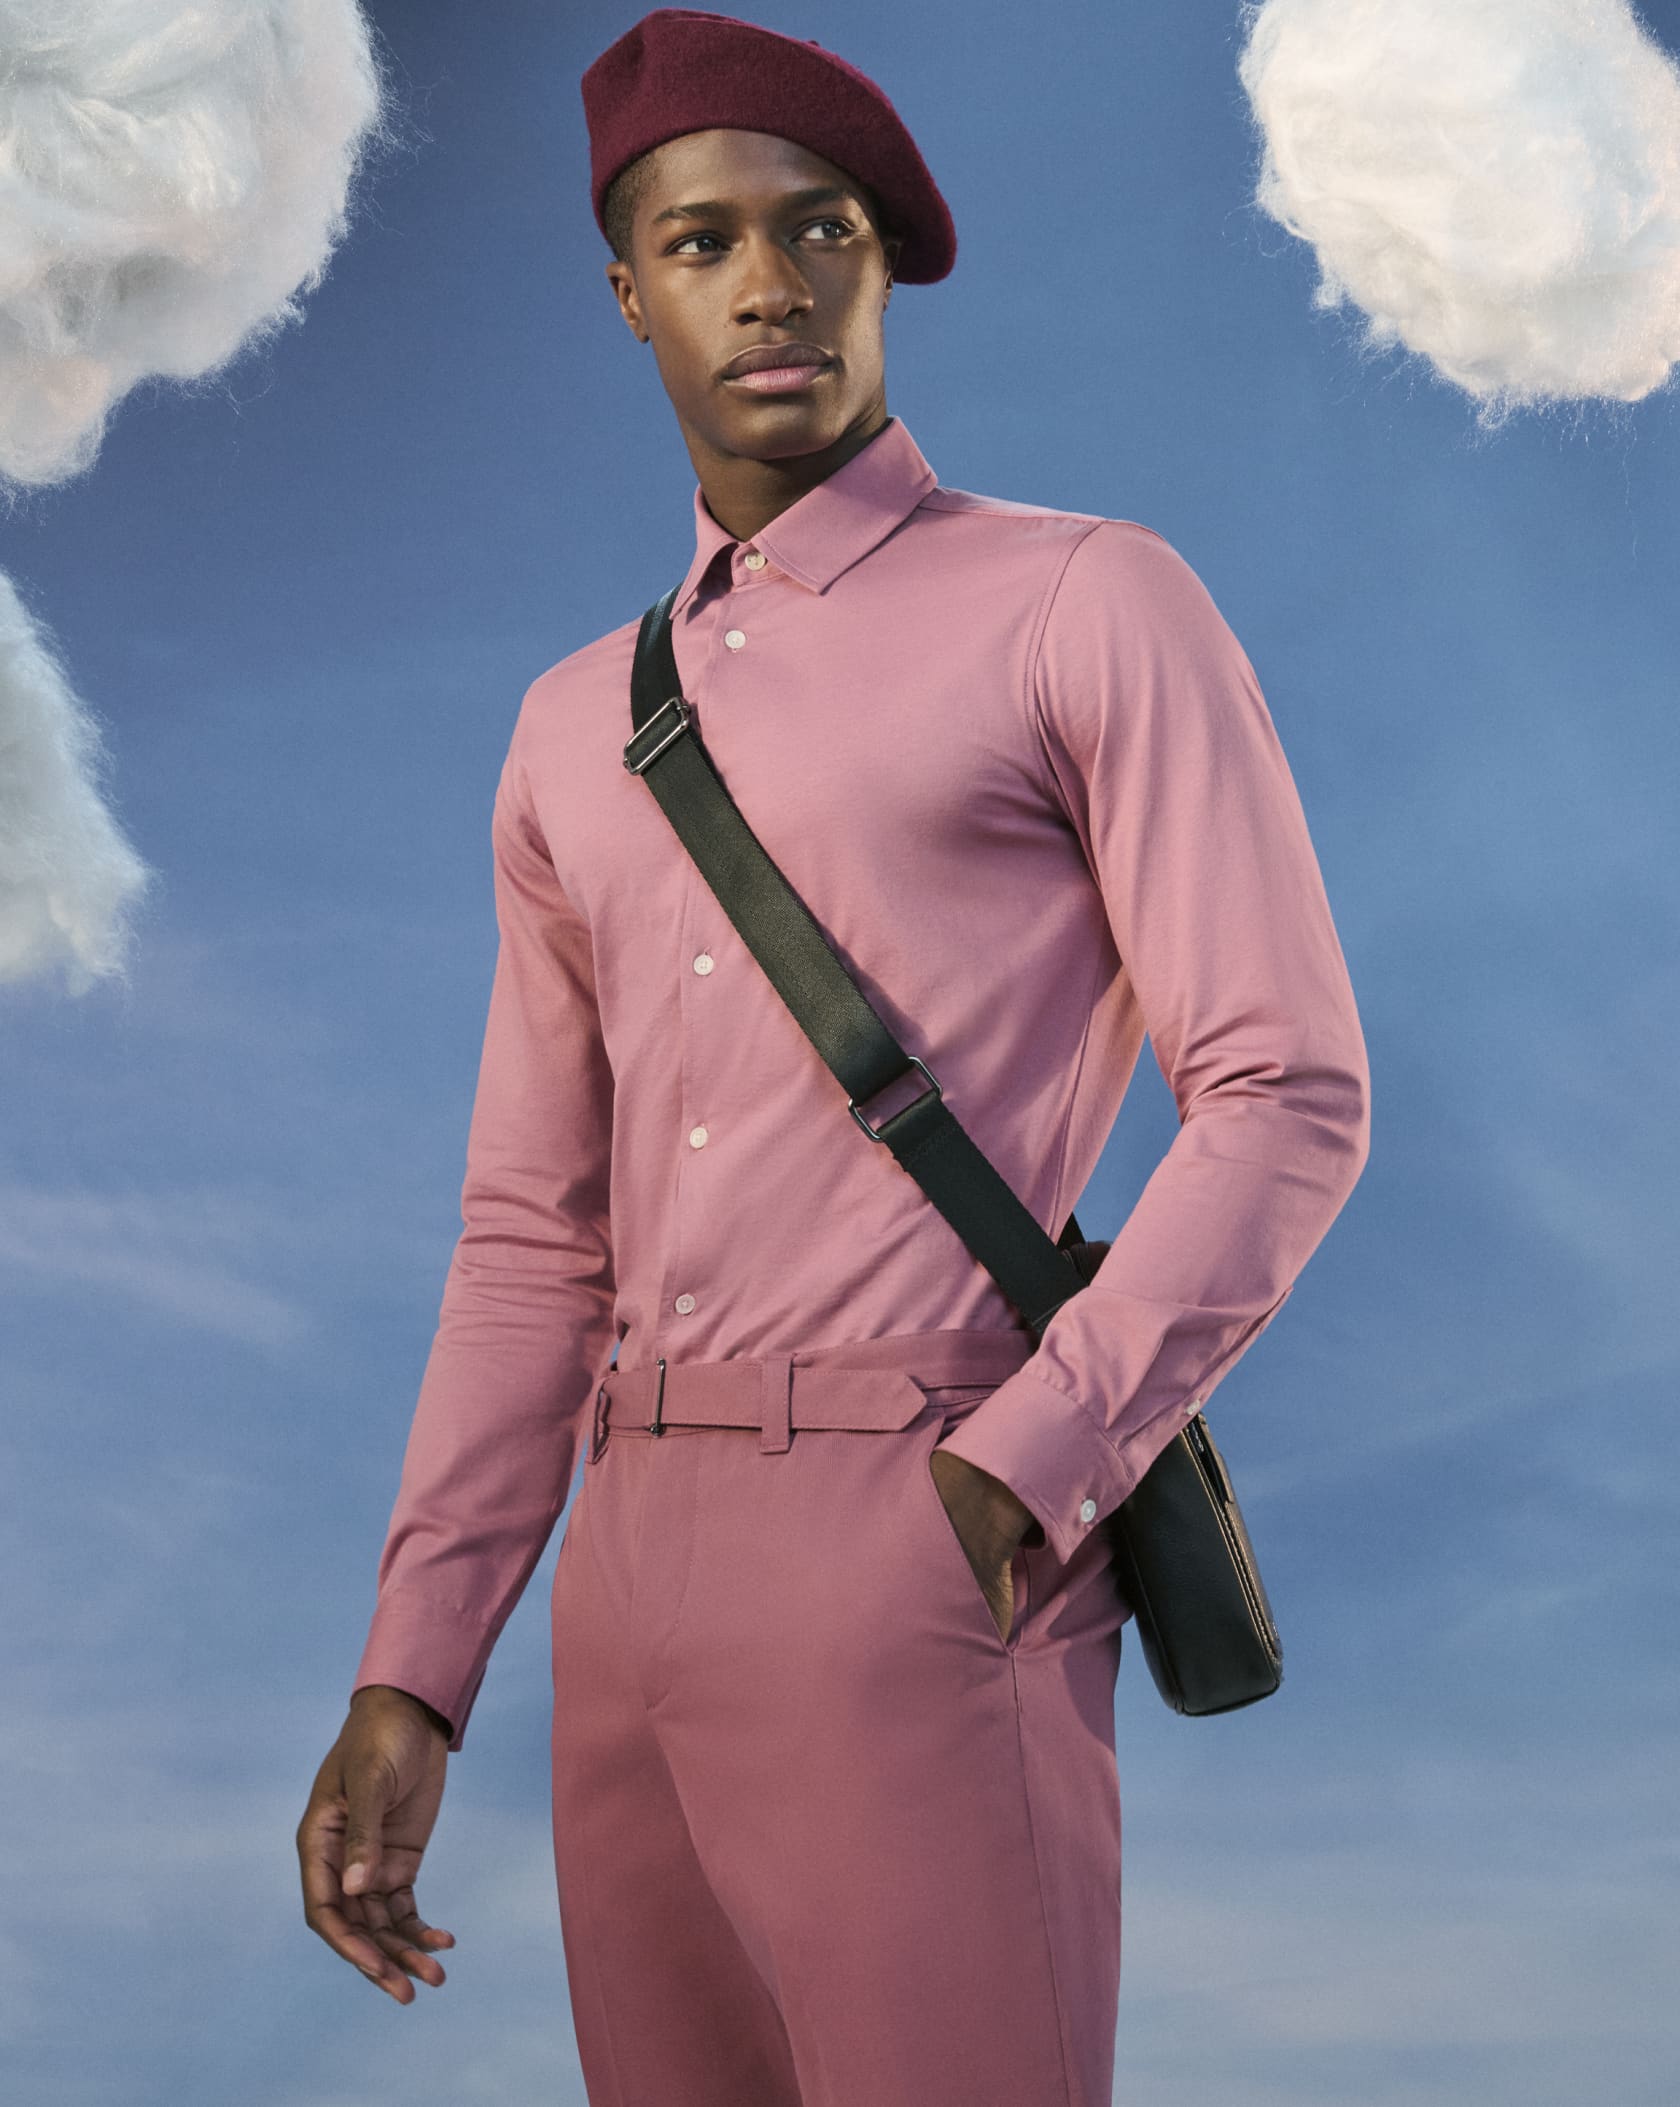 Man in a hat wearing a pink shirt and pink trousers with a cross body bag